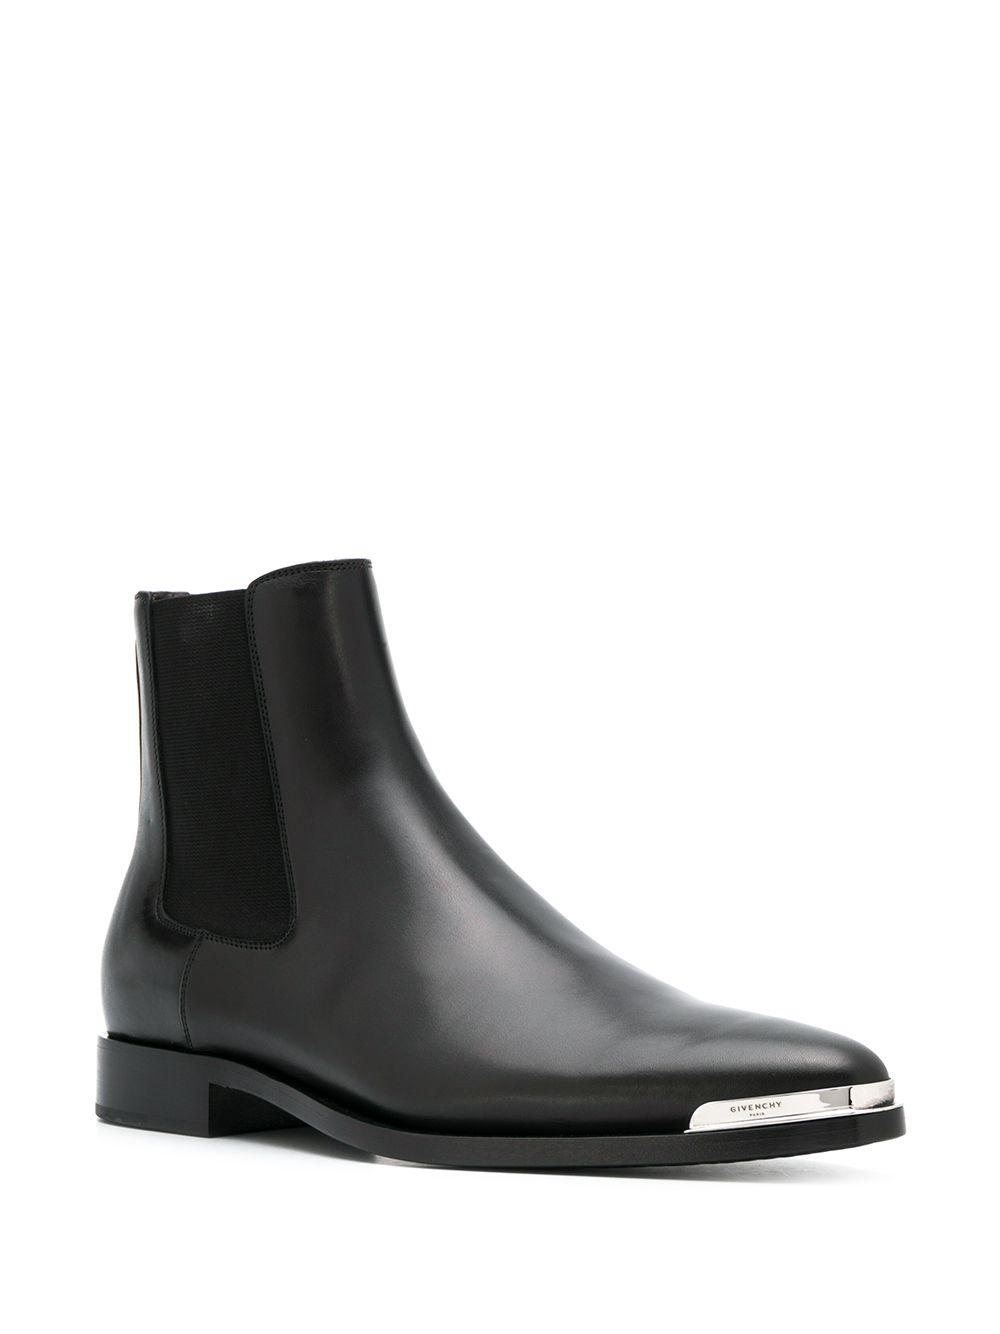 Givenchy Dallas Metal-toe Leather Chelsea Boots in Black for Men | Lyst UK